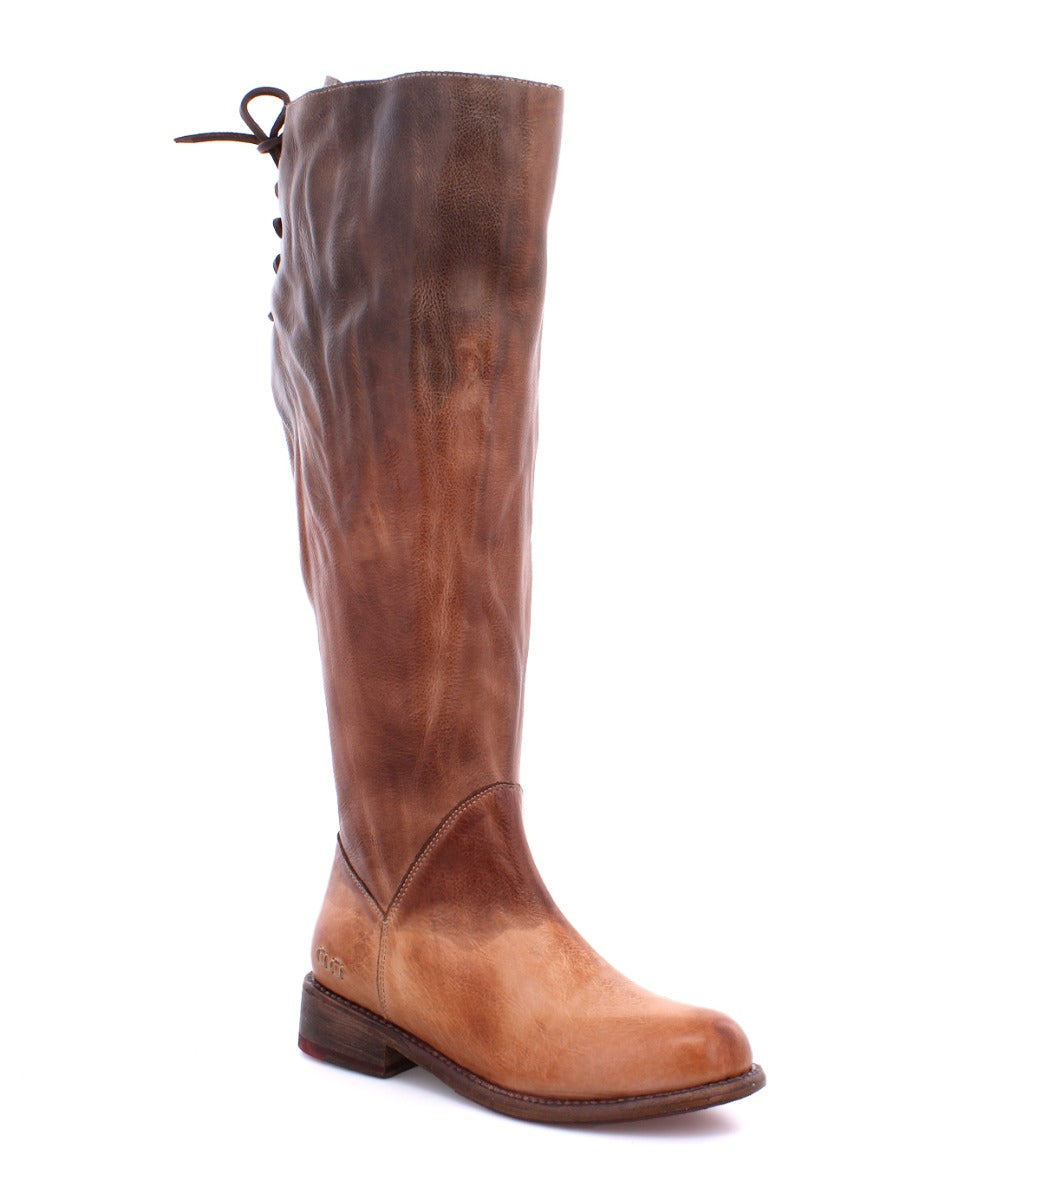 A women's Manchester Wide Calf tan leather boot with laces by Bed Stu.